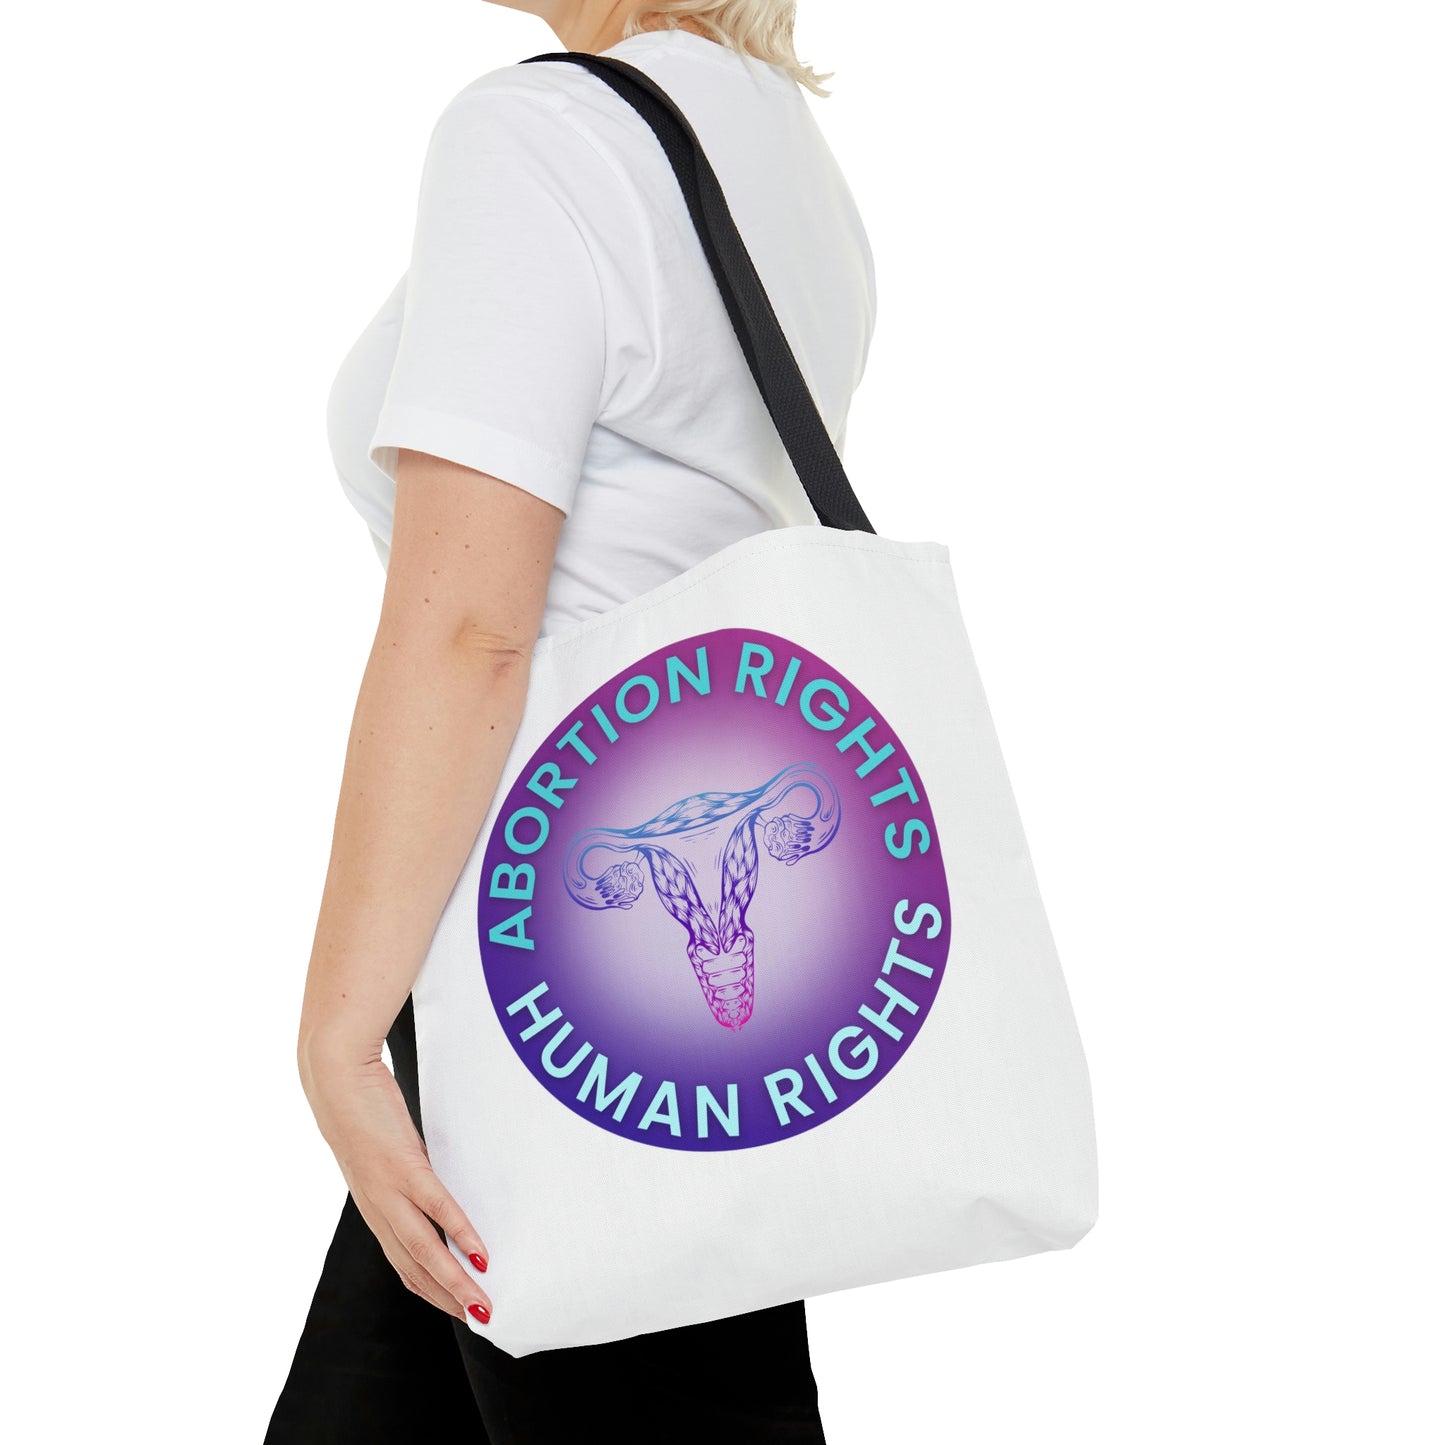 Abortion Rights are Human Rights AOP Tote Bag in 3 sizes